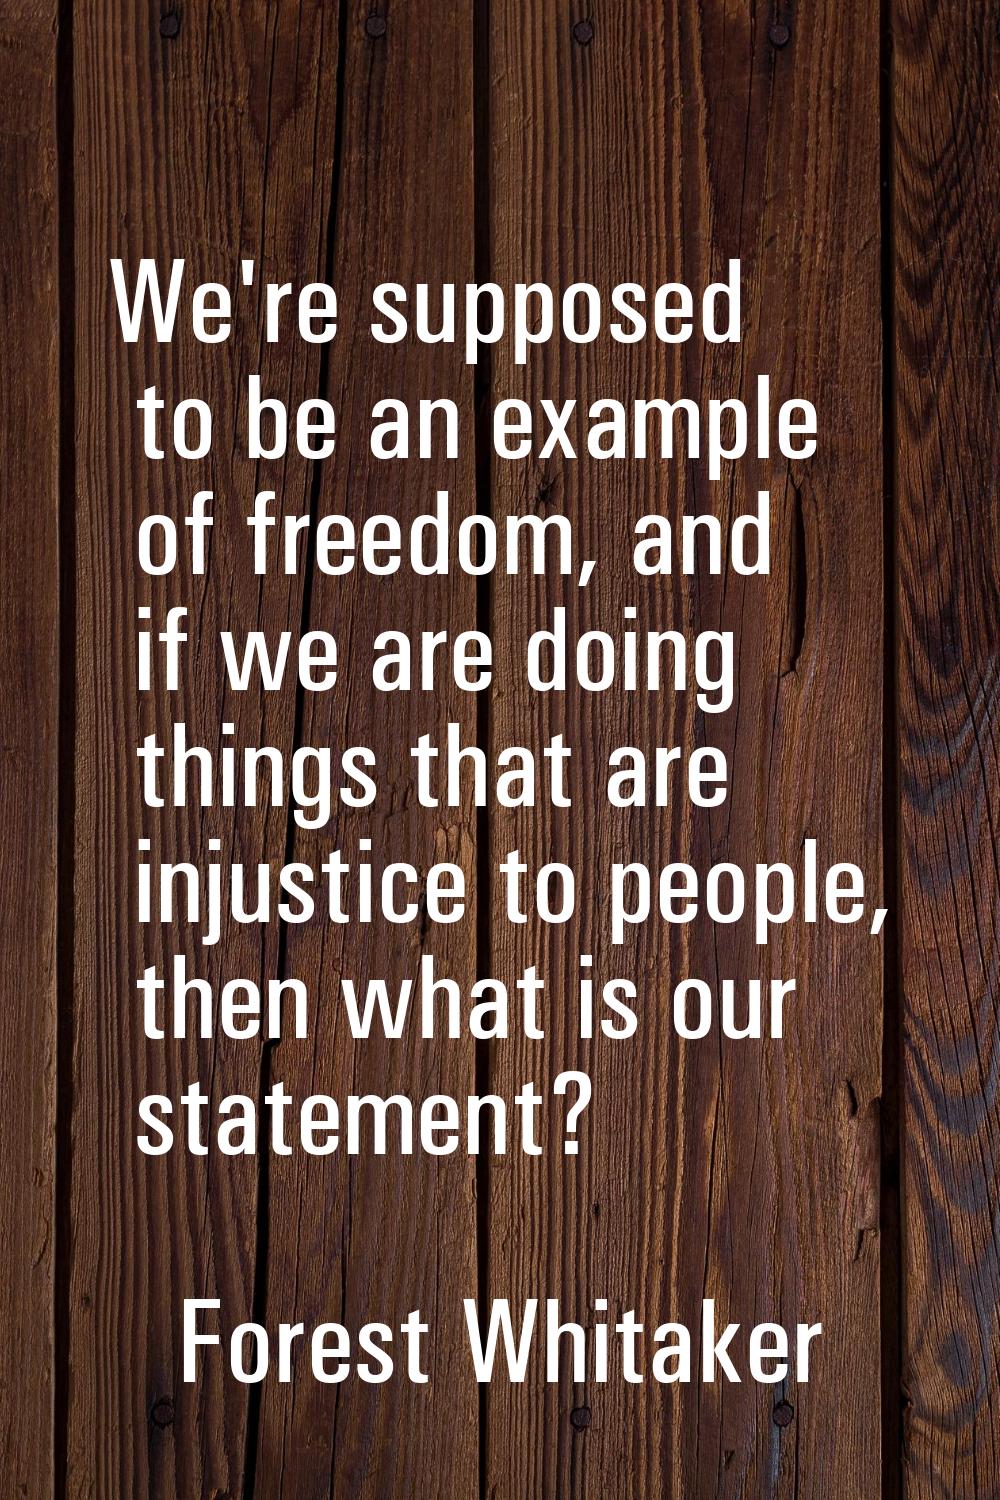 We're supposed to be an example of freedom, and if we are doing things that are injustice to people